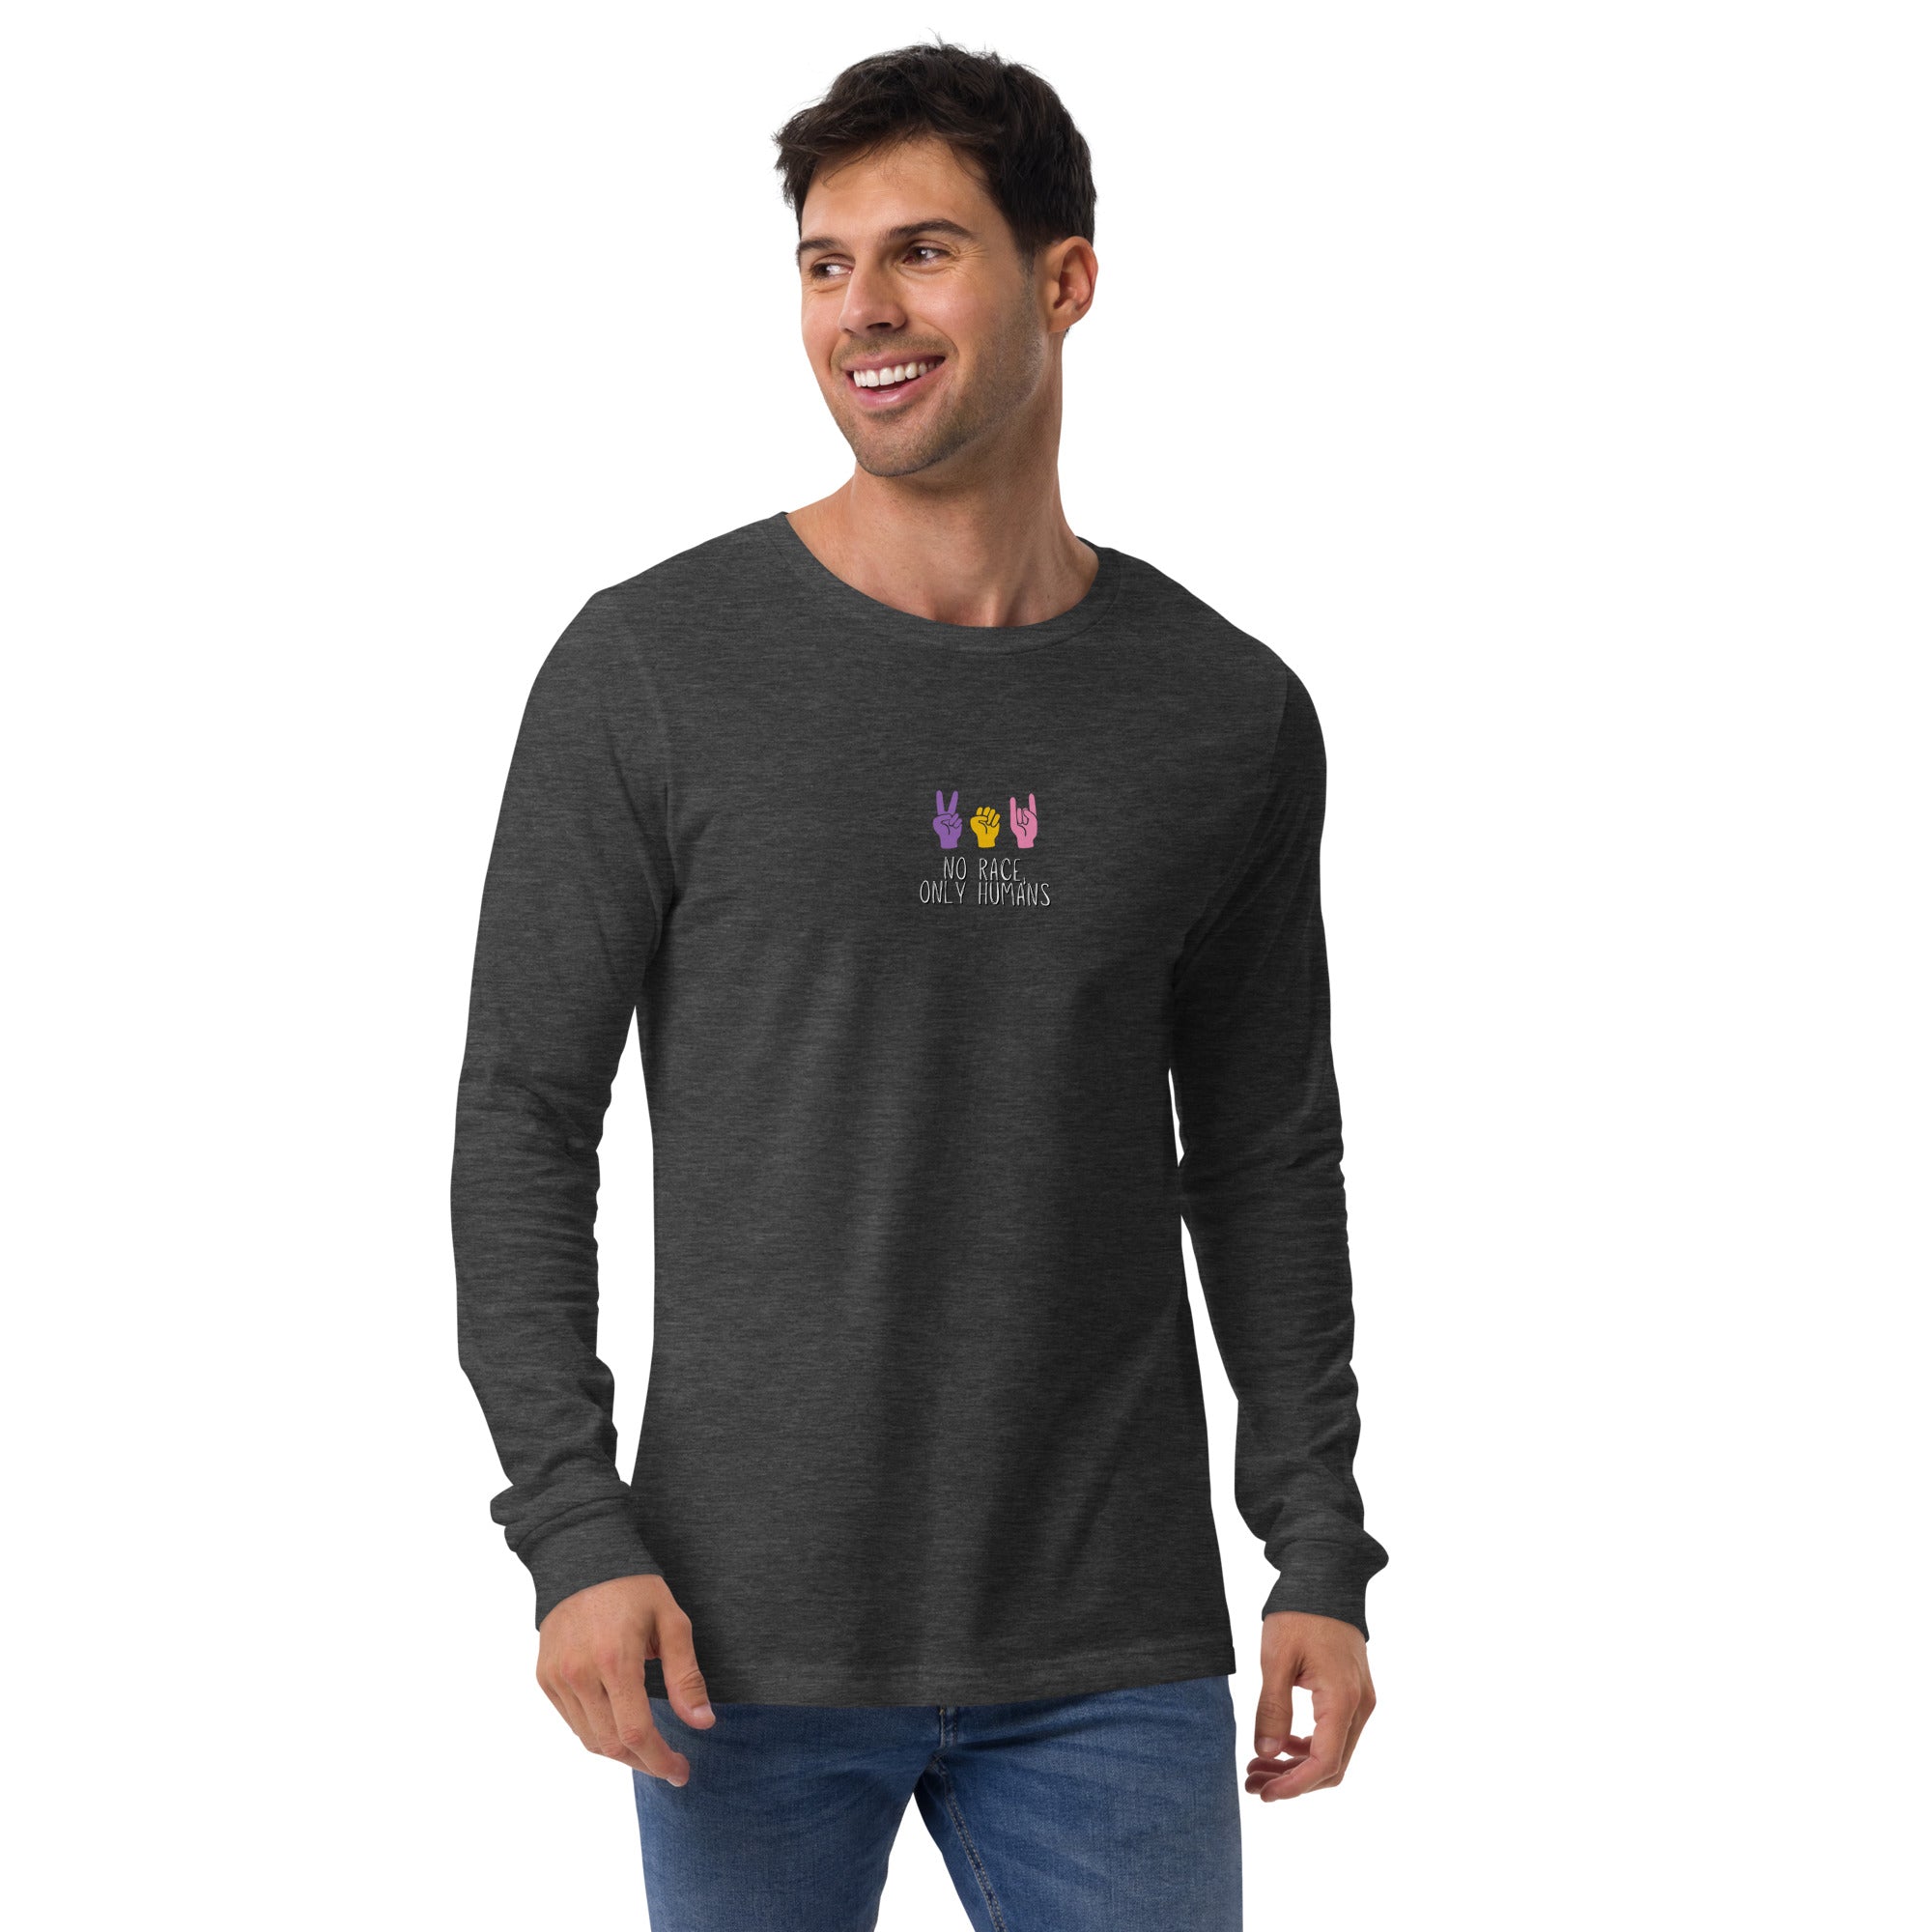 No Race Only Humans Unisex Long Sleeve Tee | Equality T-Shirt